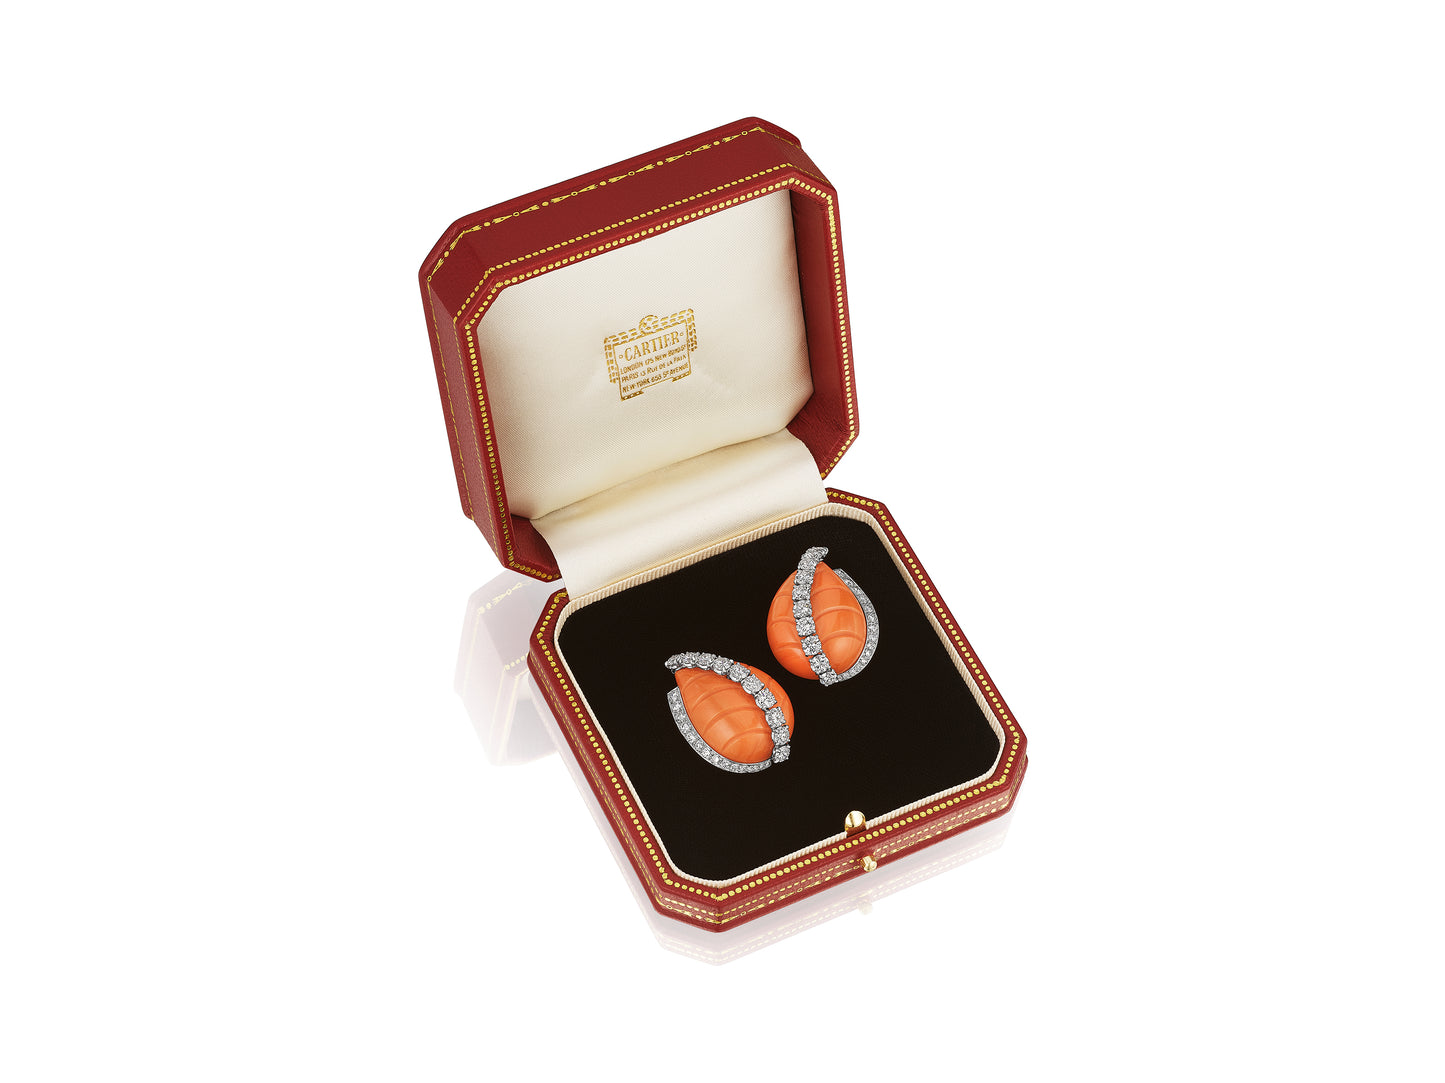 Pair of Coral and Diamond Leaf Ear Clips by Cartier, Paris, circa 1955